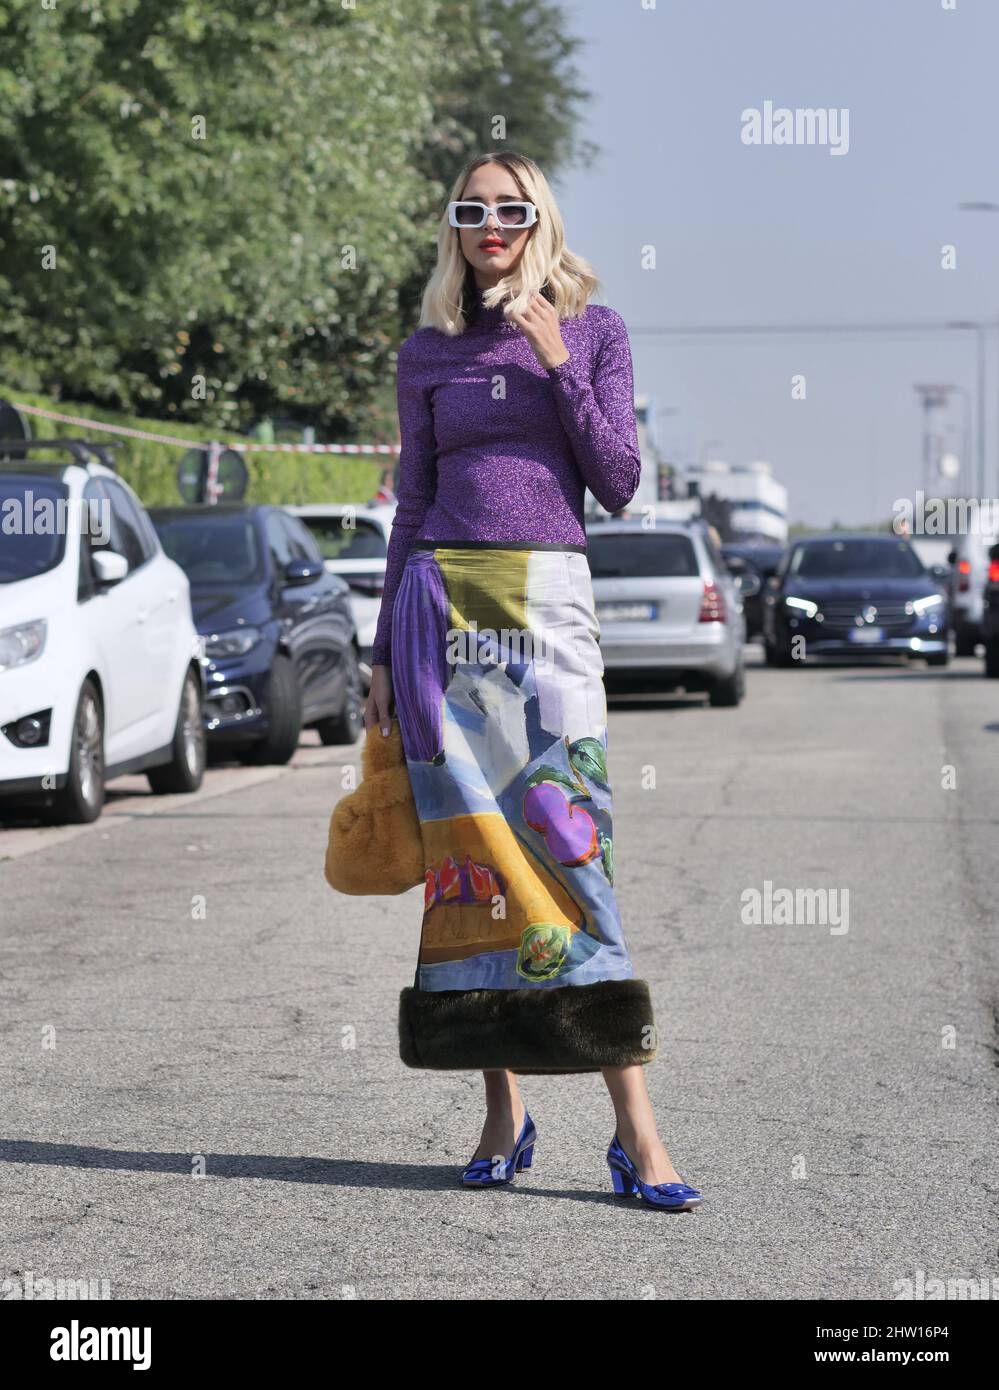 Candela Pelizza street style outfit during Milano fashion week fall/winter  collections 2021/2022 Stock Photo - Alamy